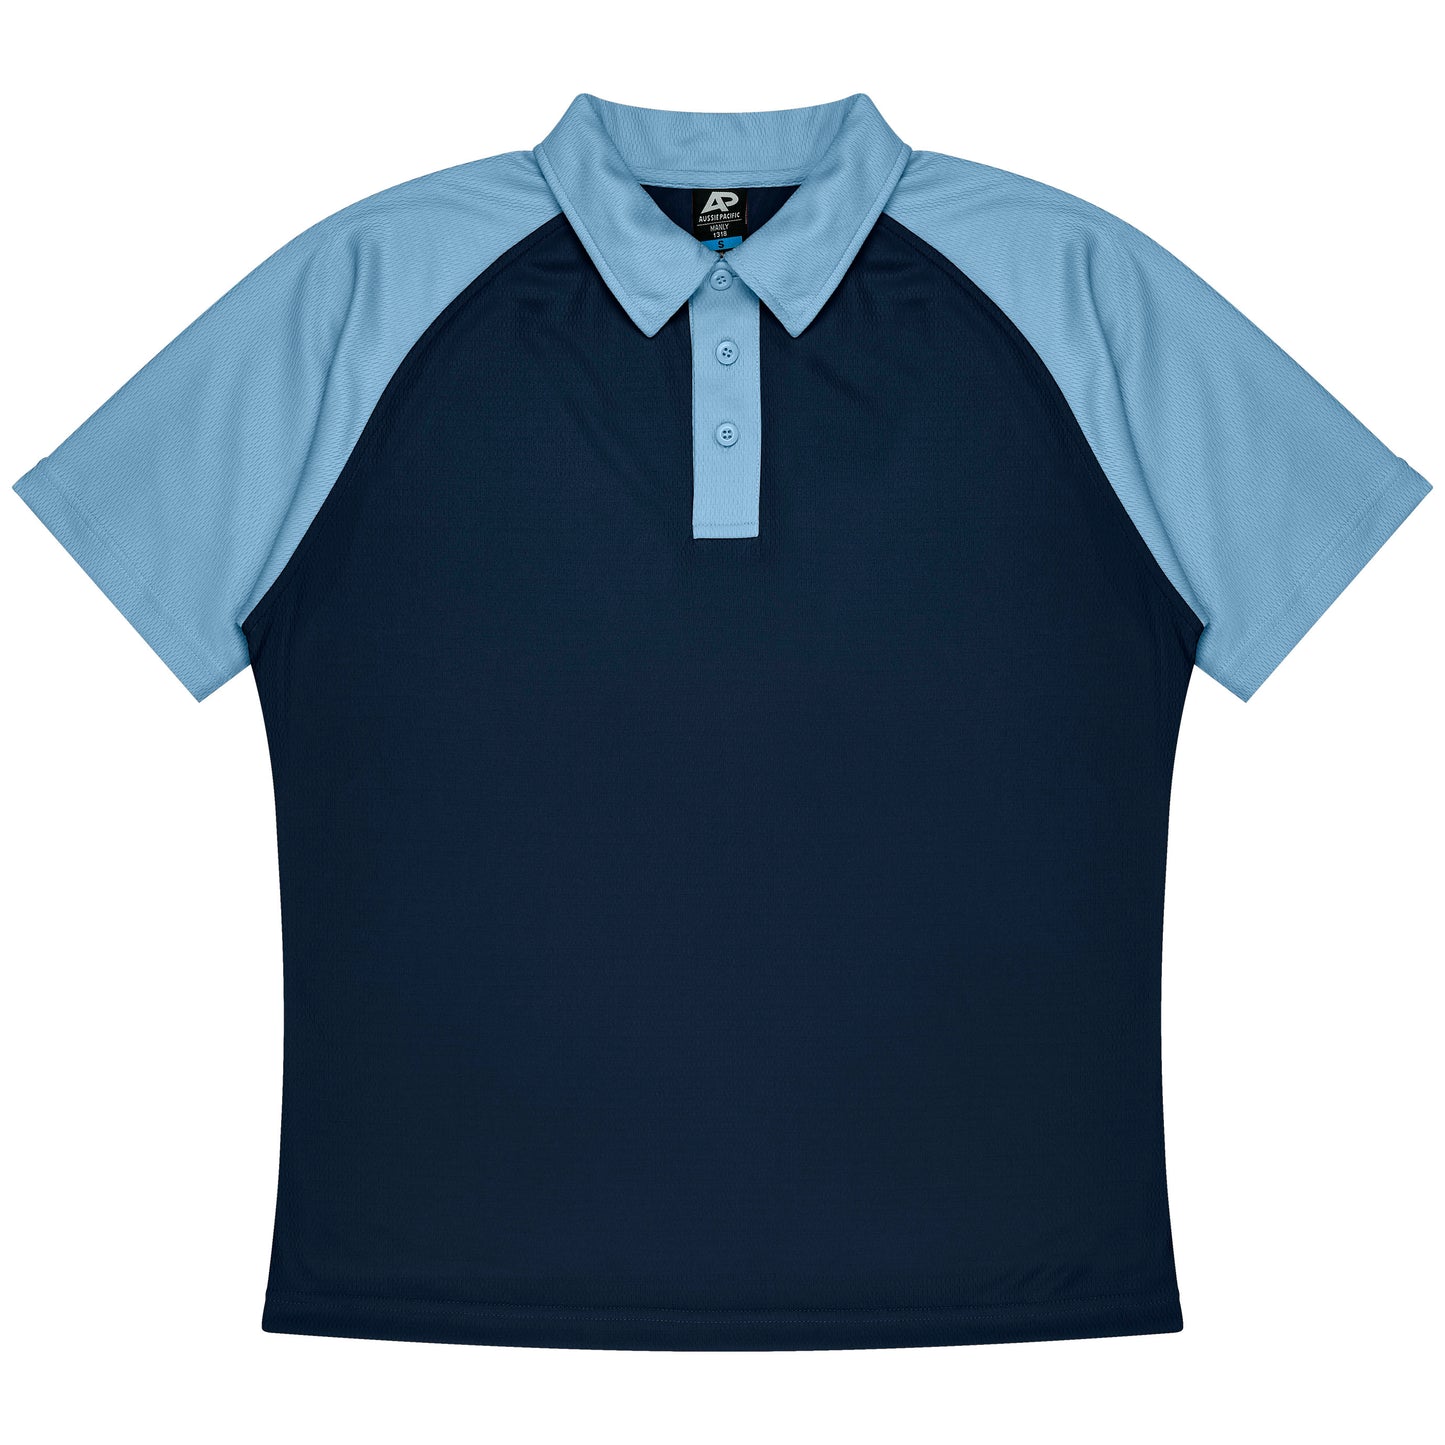 Manly Kids Polo